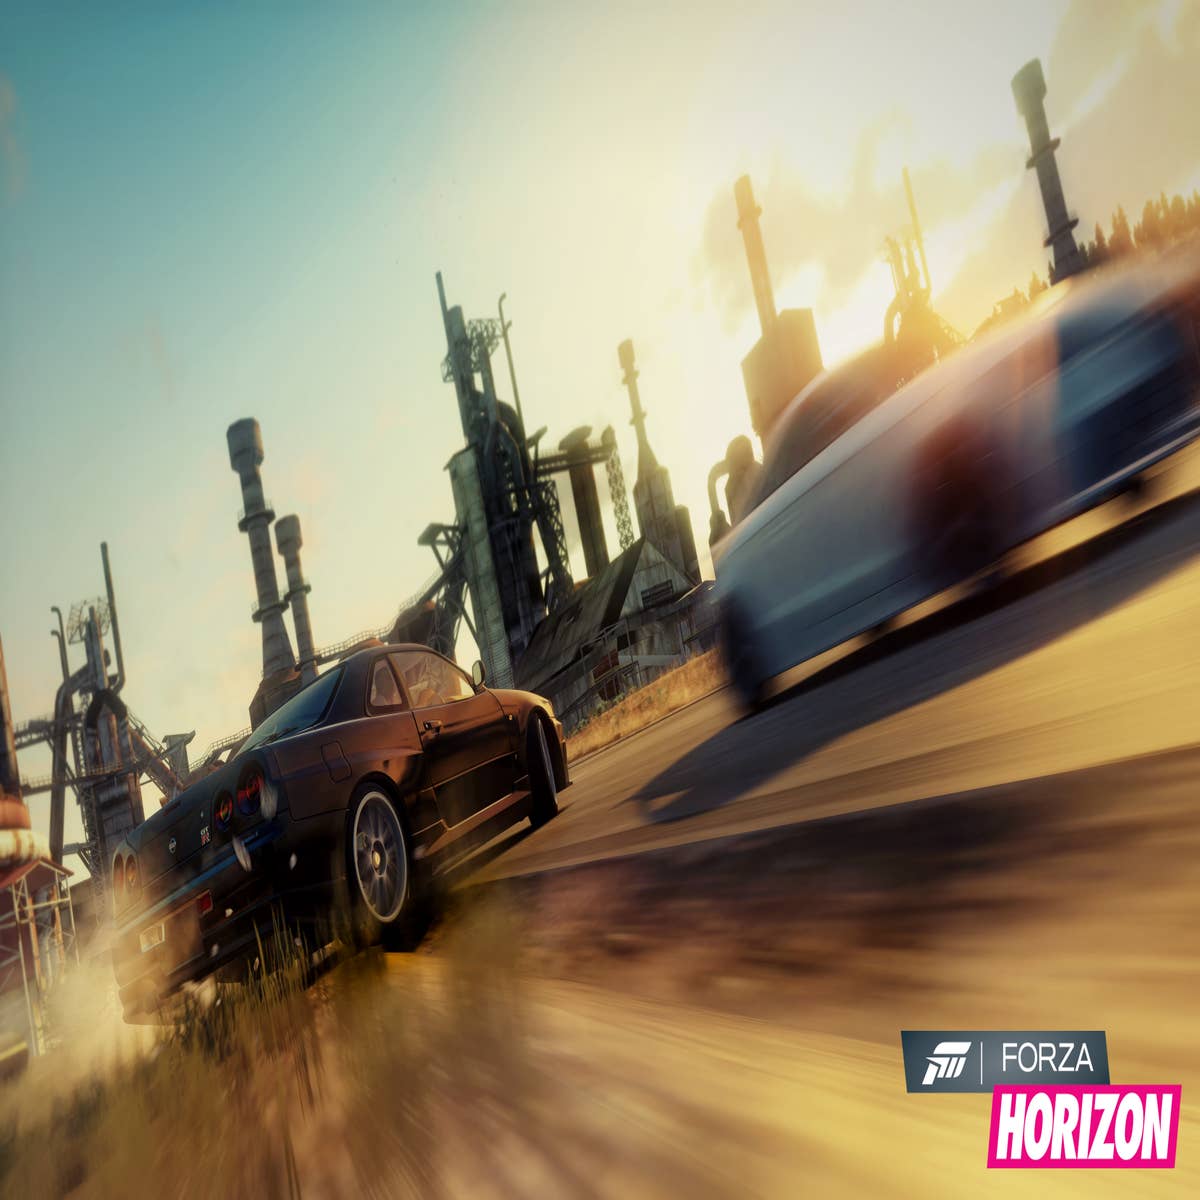 Forza Horizon - Game Overview